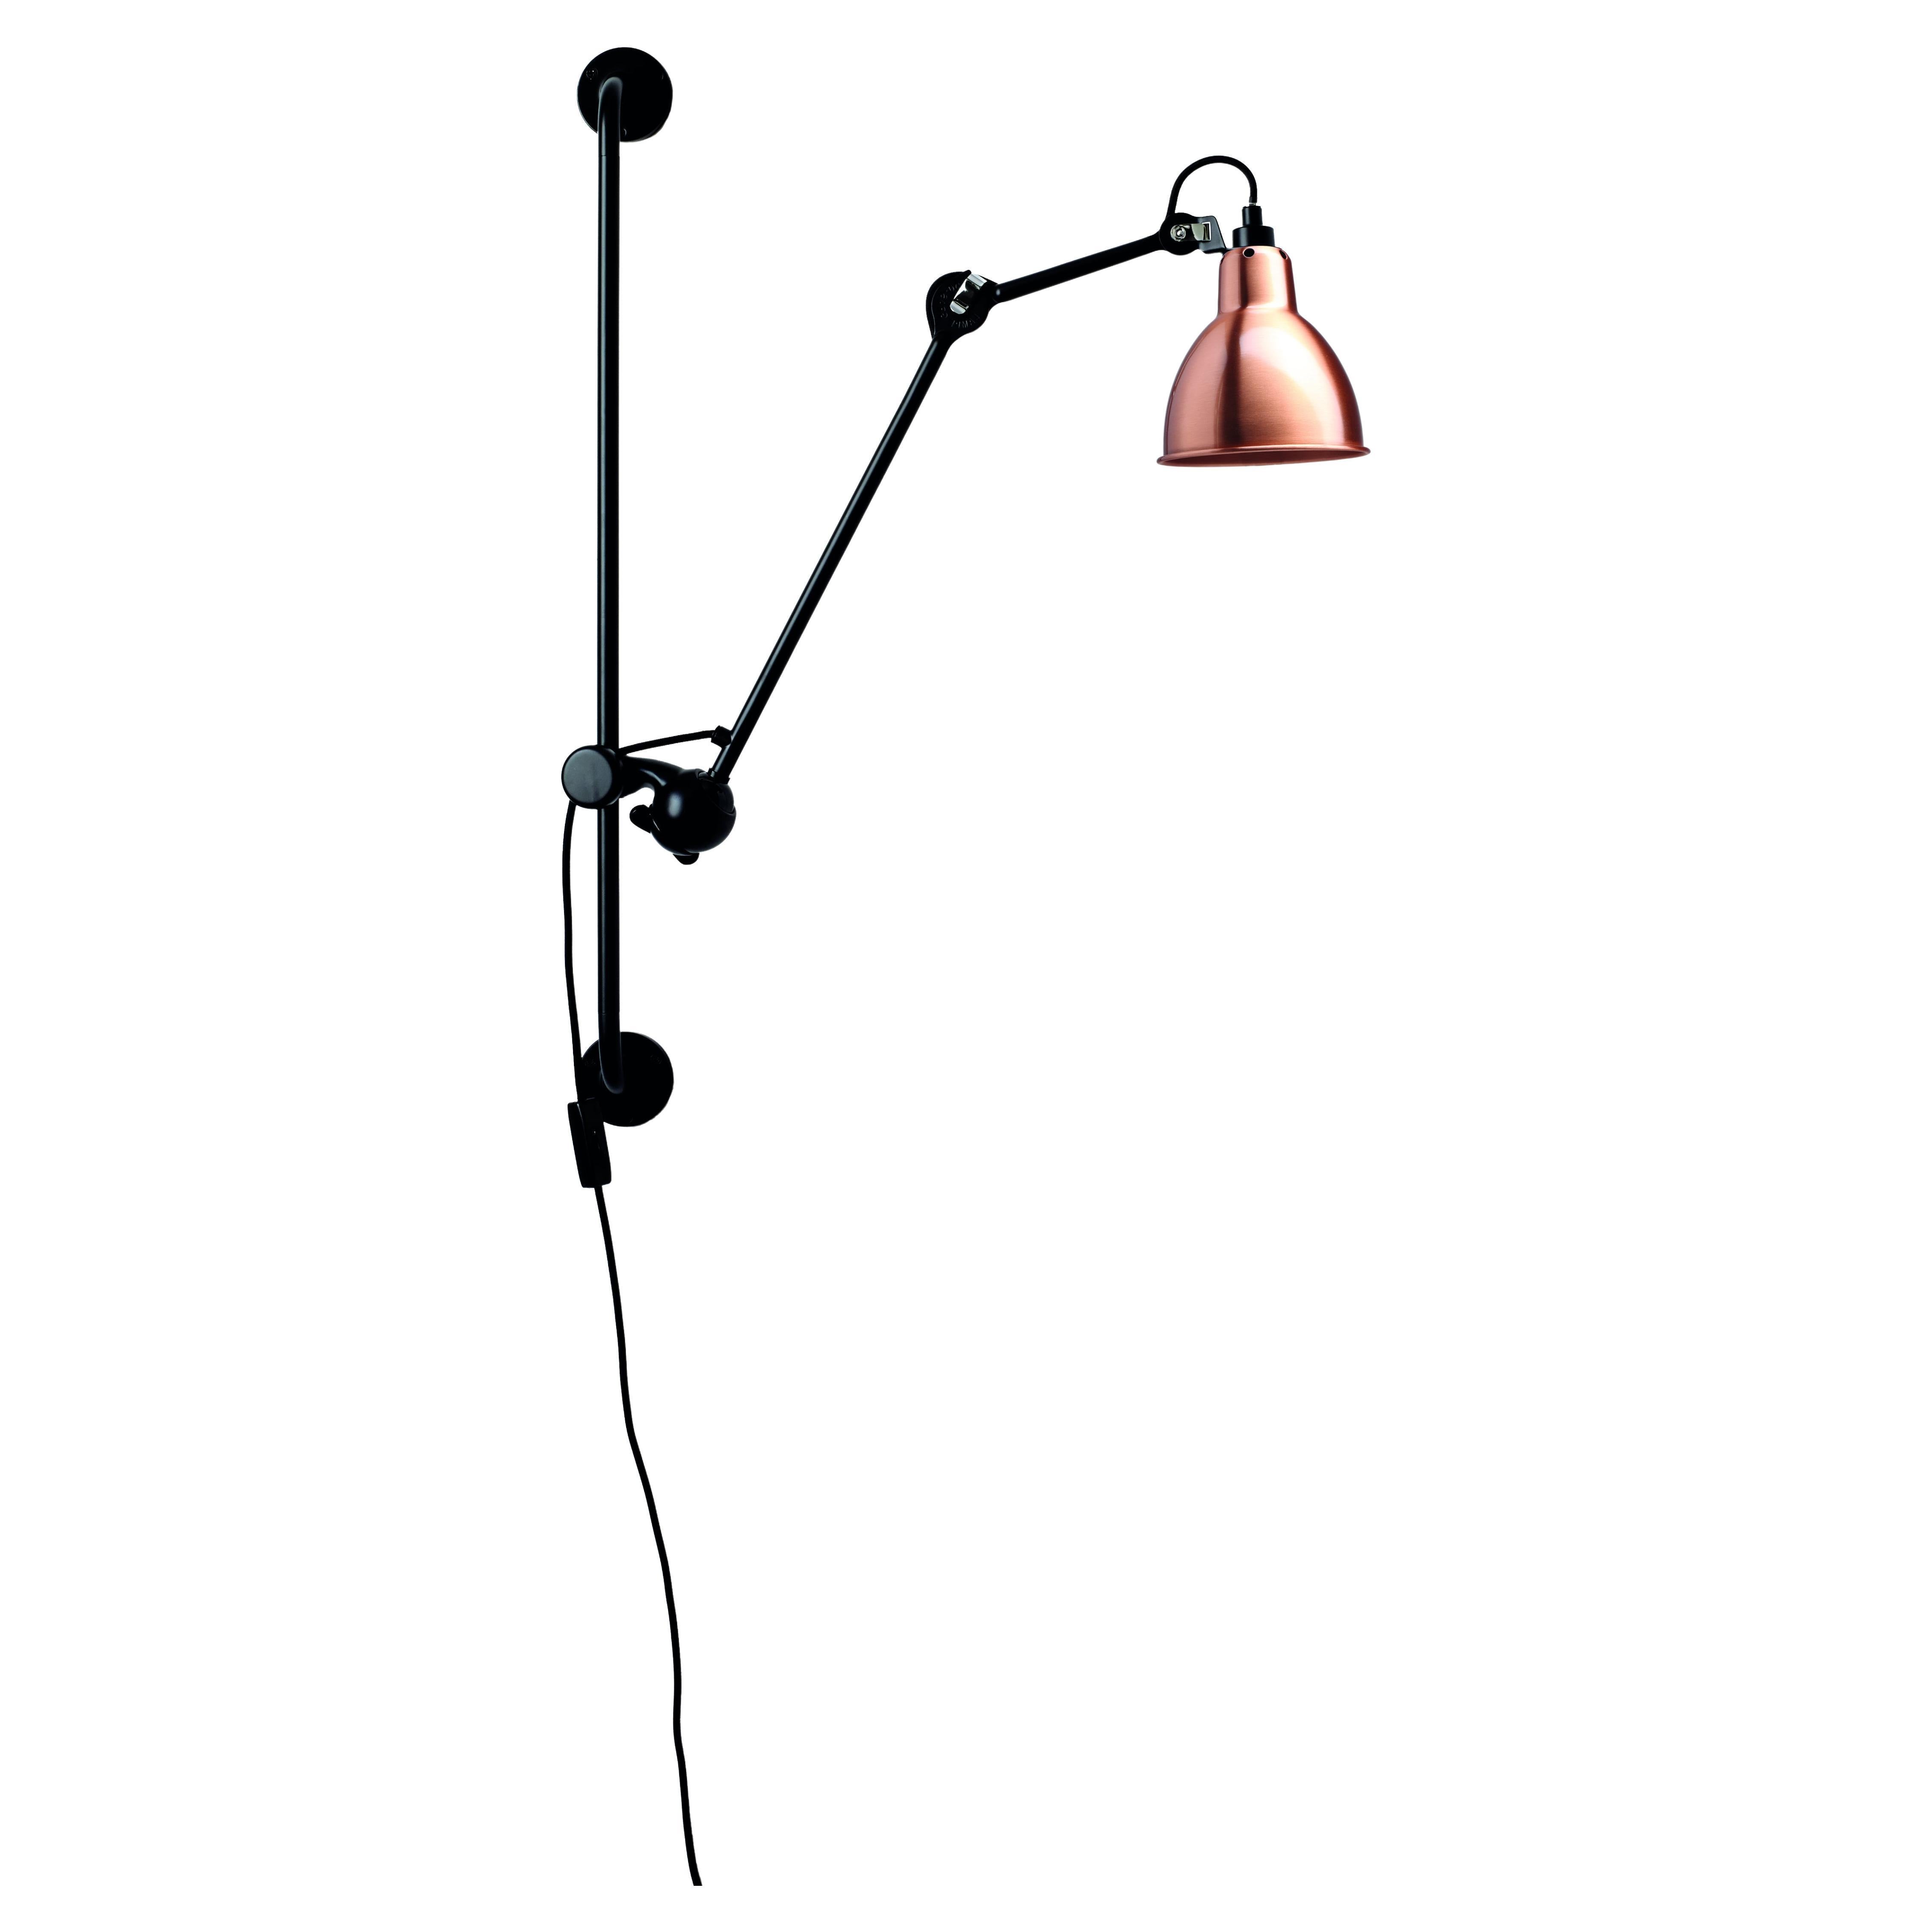 DCW Editions La Lampe Gras N°210 Wall Lamp in Black Arm and Copper Shade